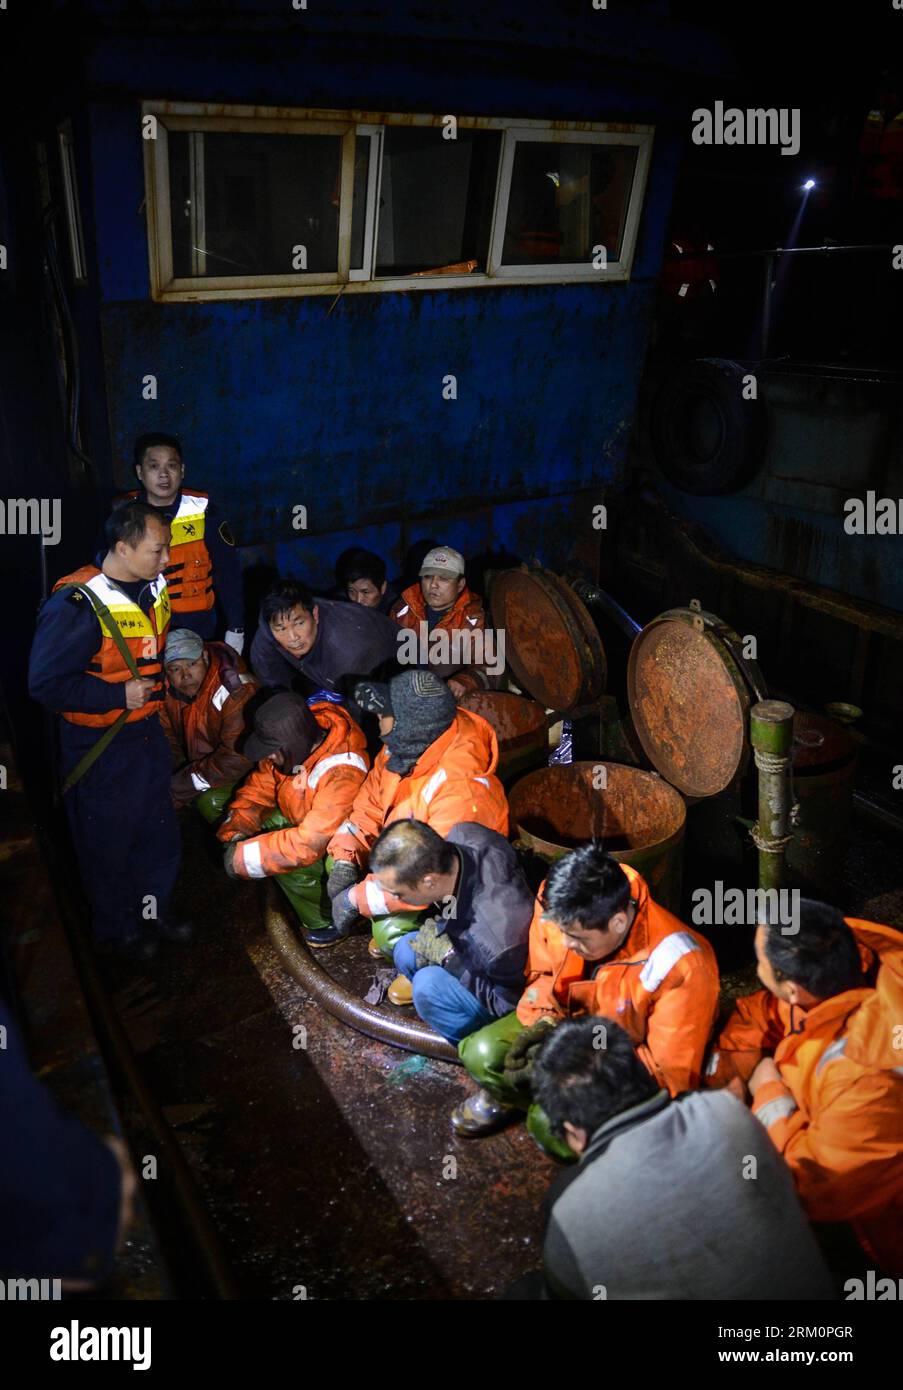 Bildnummer: 59463485  Datum: 29.03.2013  Copyright: imago/Xinhua Photo taken on March 29, 2013 shows police watching over smugglers on a boat offshore east China s Zhejiang Province. A gangs smuggling case involving 15,000 tons of refined oil worthy over 100 million Yuan (approximately 15.9 million U.S. dollars) was seized here on Sunday, as announced by Hangzhou customs on March 31, it is the biggest ever gangs smuggling case offshore Zhejiang province. (Xinhua/Xu Yu) (cxy) CHINA-ZHEJIANG-GANGS SMUGGLING CASE (CN) PUBLICATIONxNOTxINxCHN Gesellschaft Wirtschaft Kriminalität Öl Ölschmuggel Schm Stock Photo